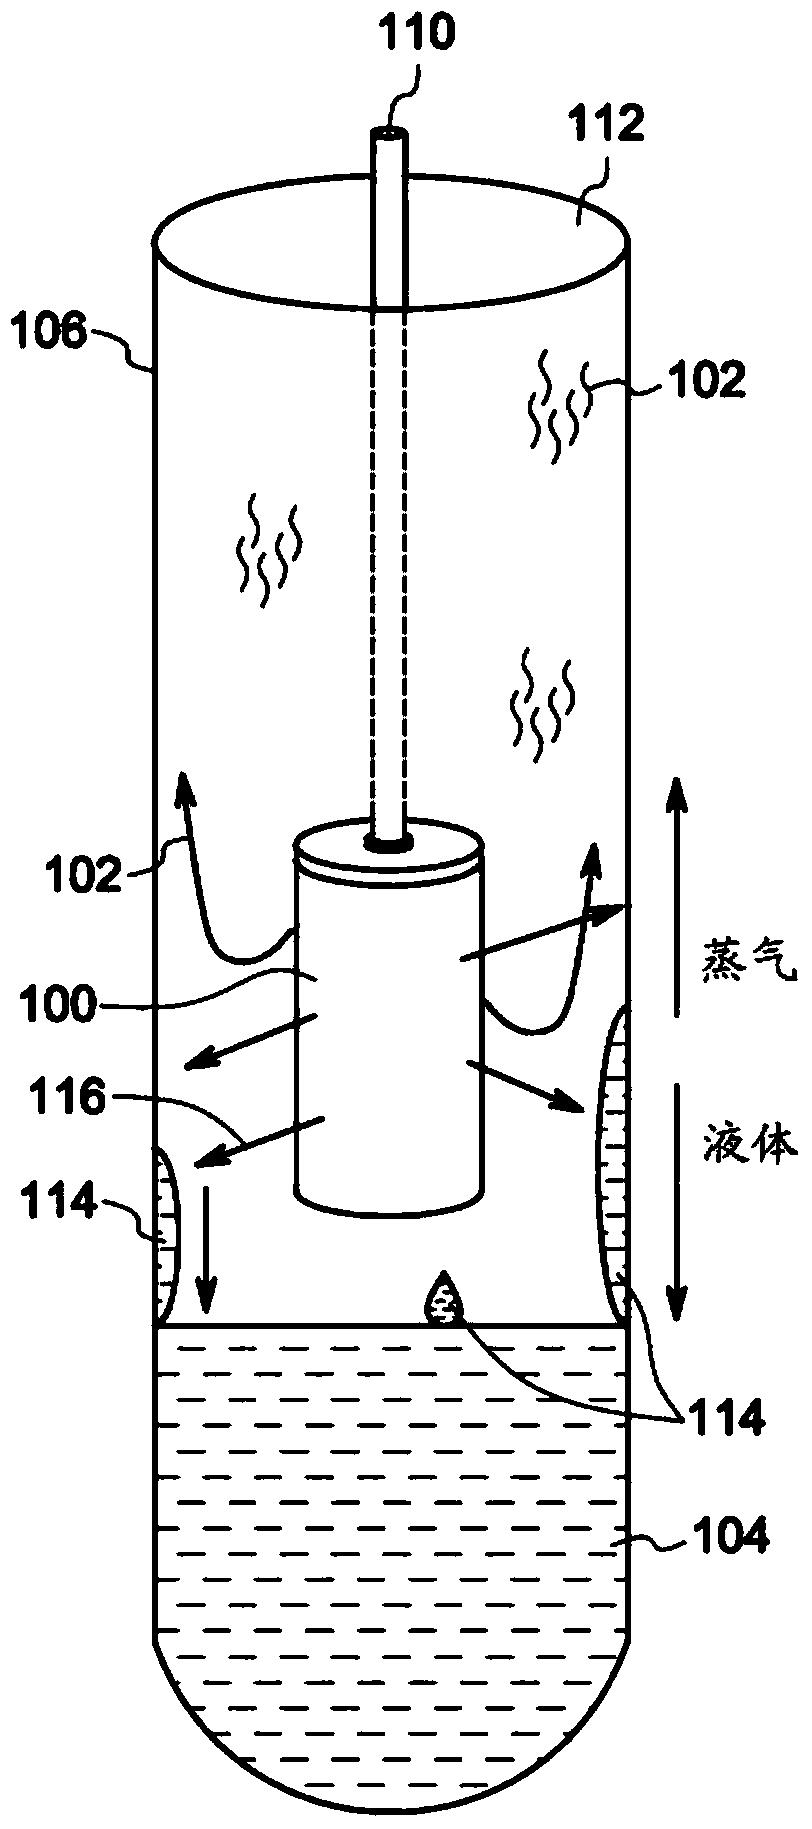 A self cleaning gas-liquid separator for serial or parallel collection of liquid fractions